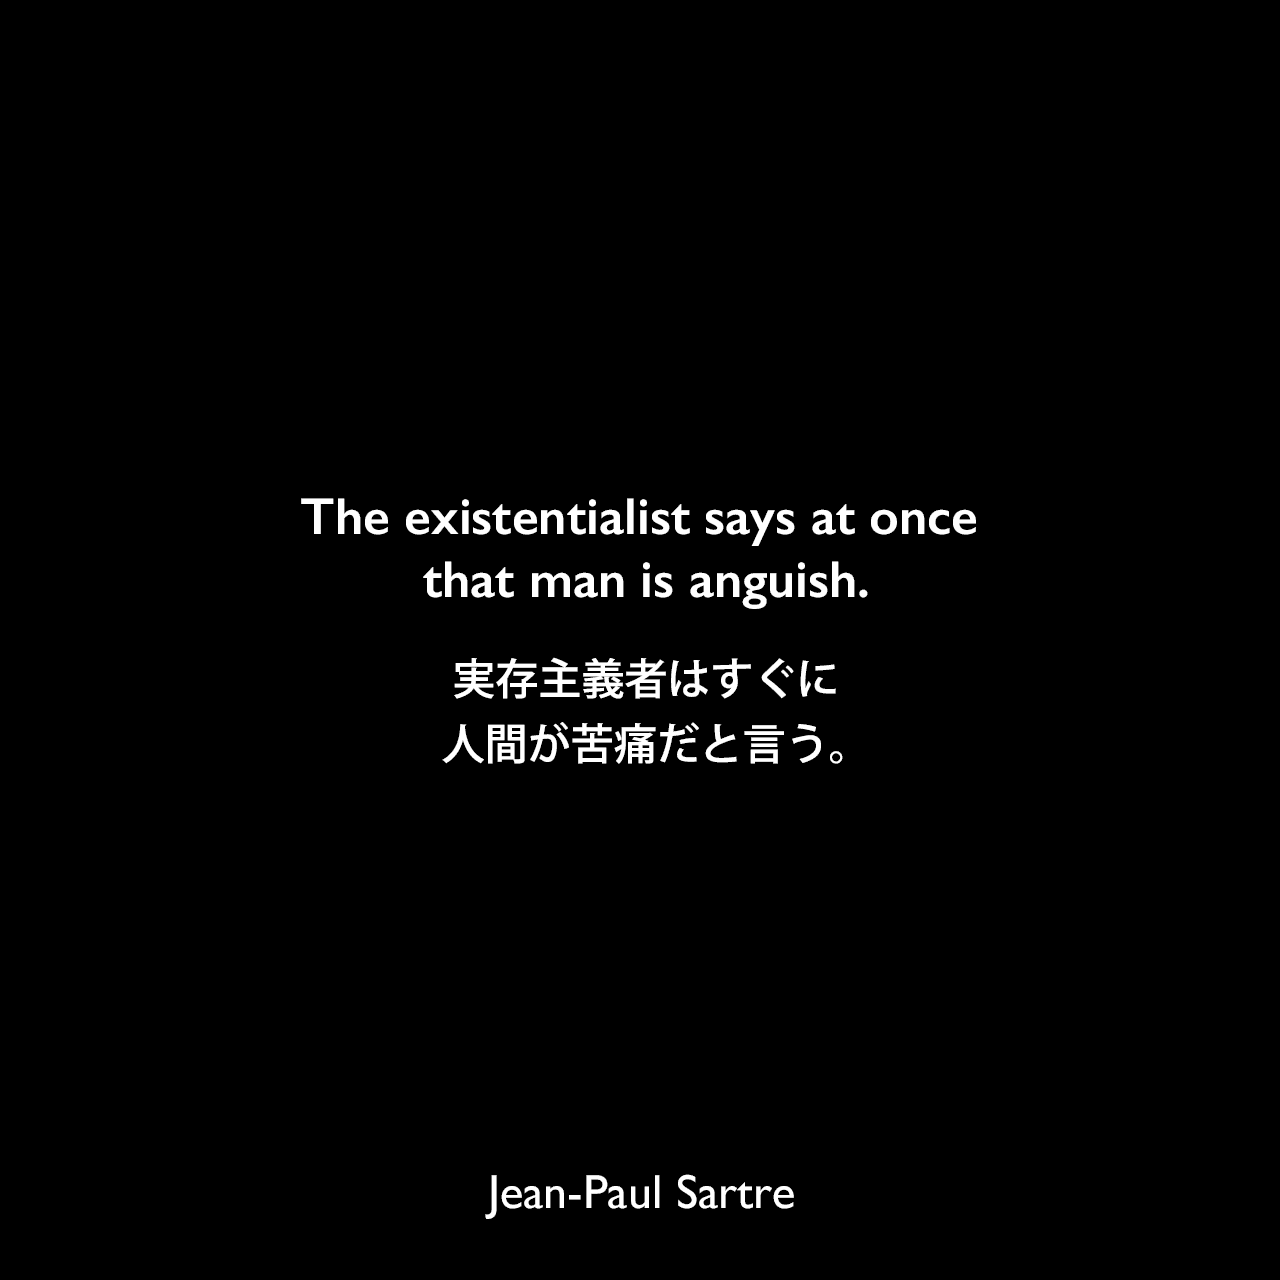 The existentialist says at once that man is anguish.実存主義者はすぐに人間が苦痛だと言う。Jean-Paul Sartre